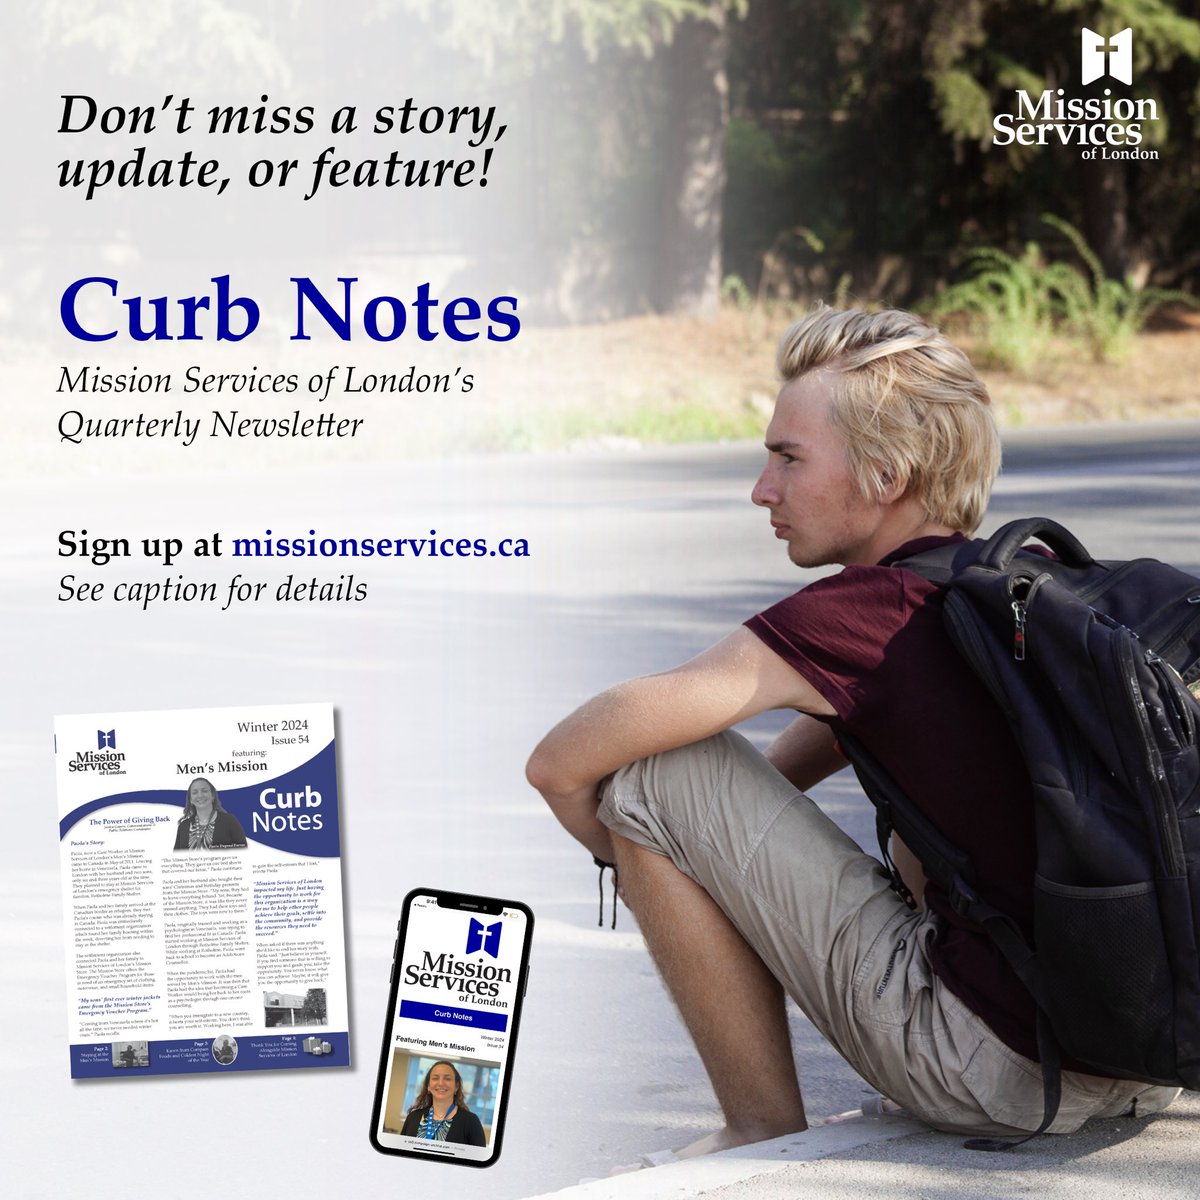 To sign up for Curb Notes, visit missionservices.ca and fill in your name and email under “I want updates” on the homepage. The “I want updates” prompt will be directly under the first featured story. If you need additional support, please send us a message.